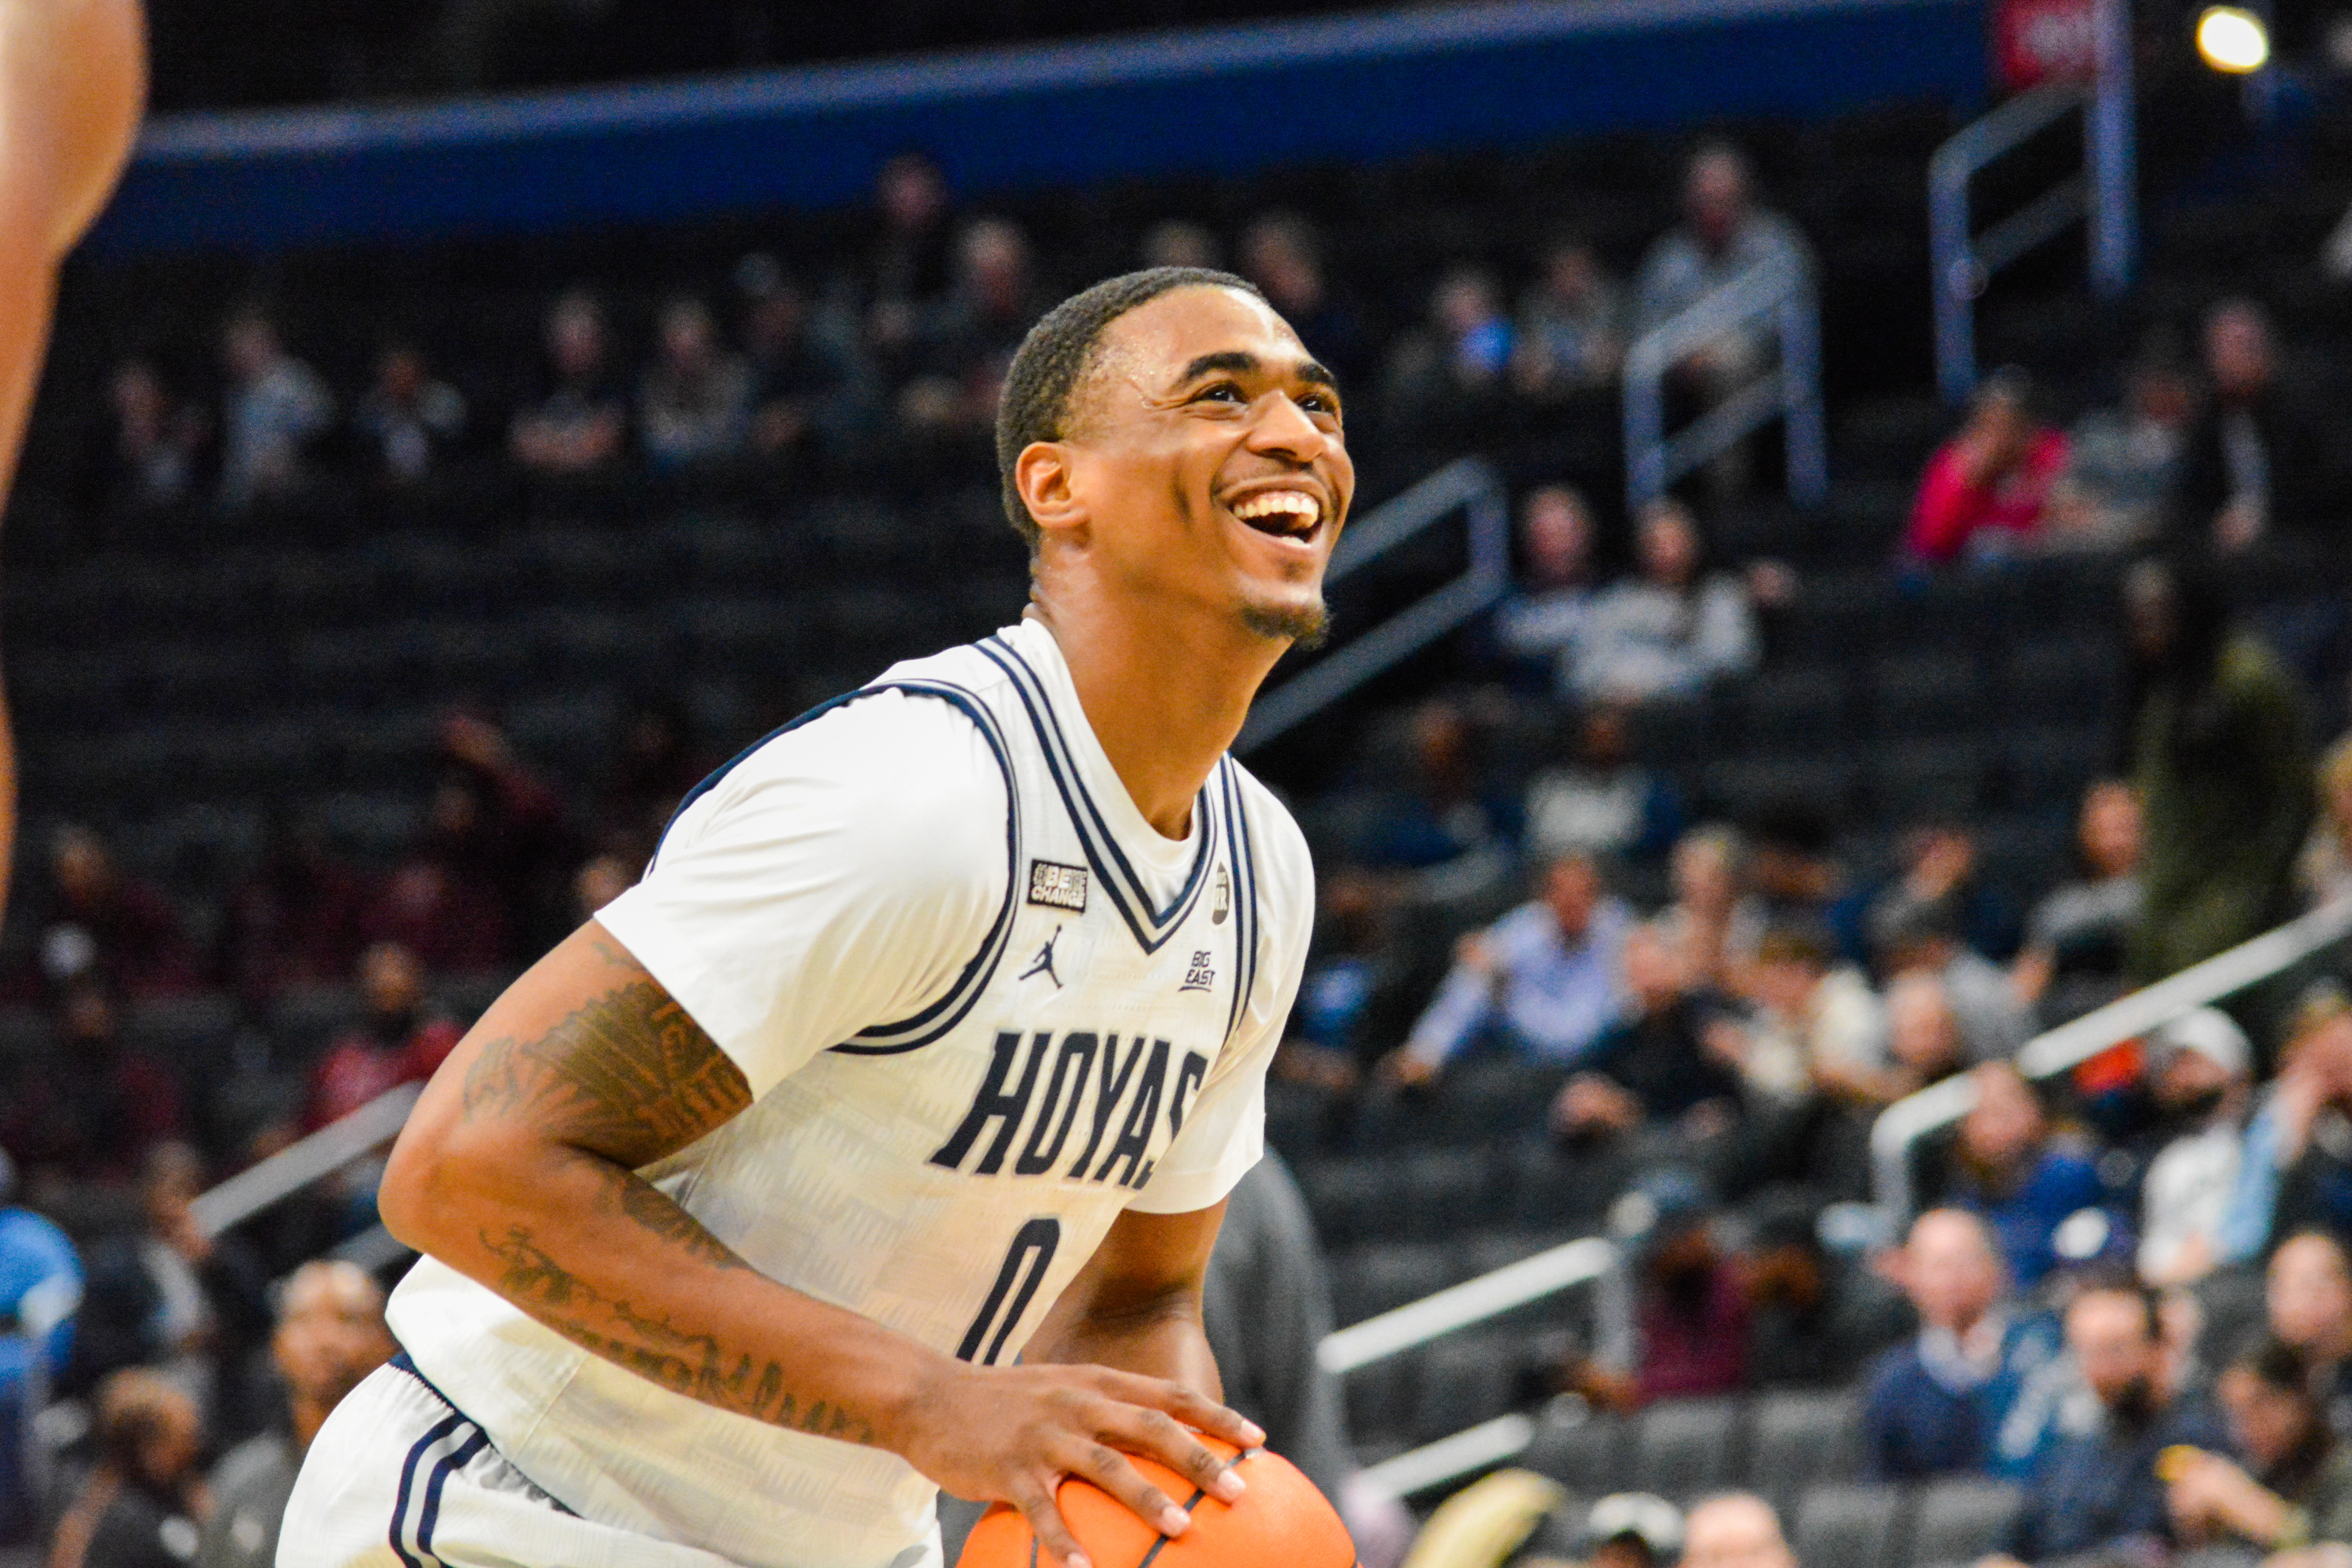 MEN'S BASKETBALL  Georgetown Edged Out By Villanova in Final Seconds